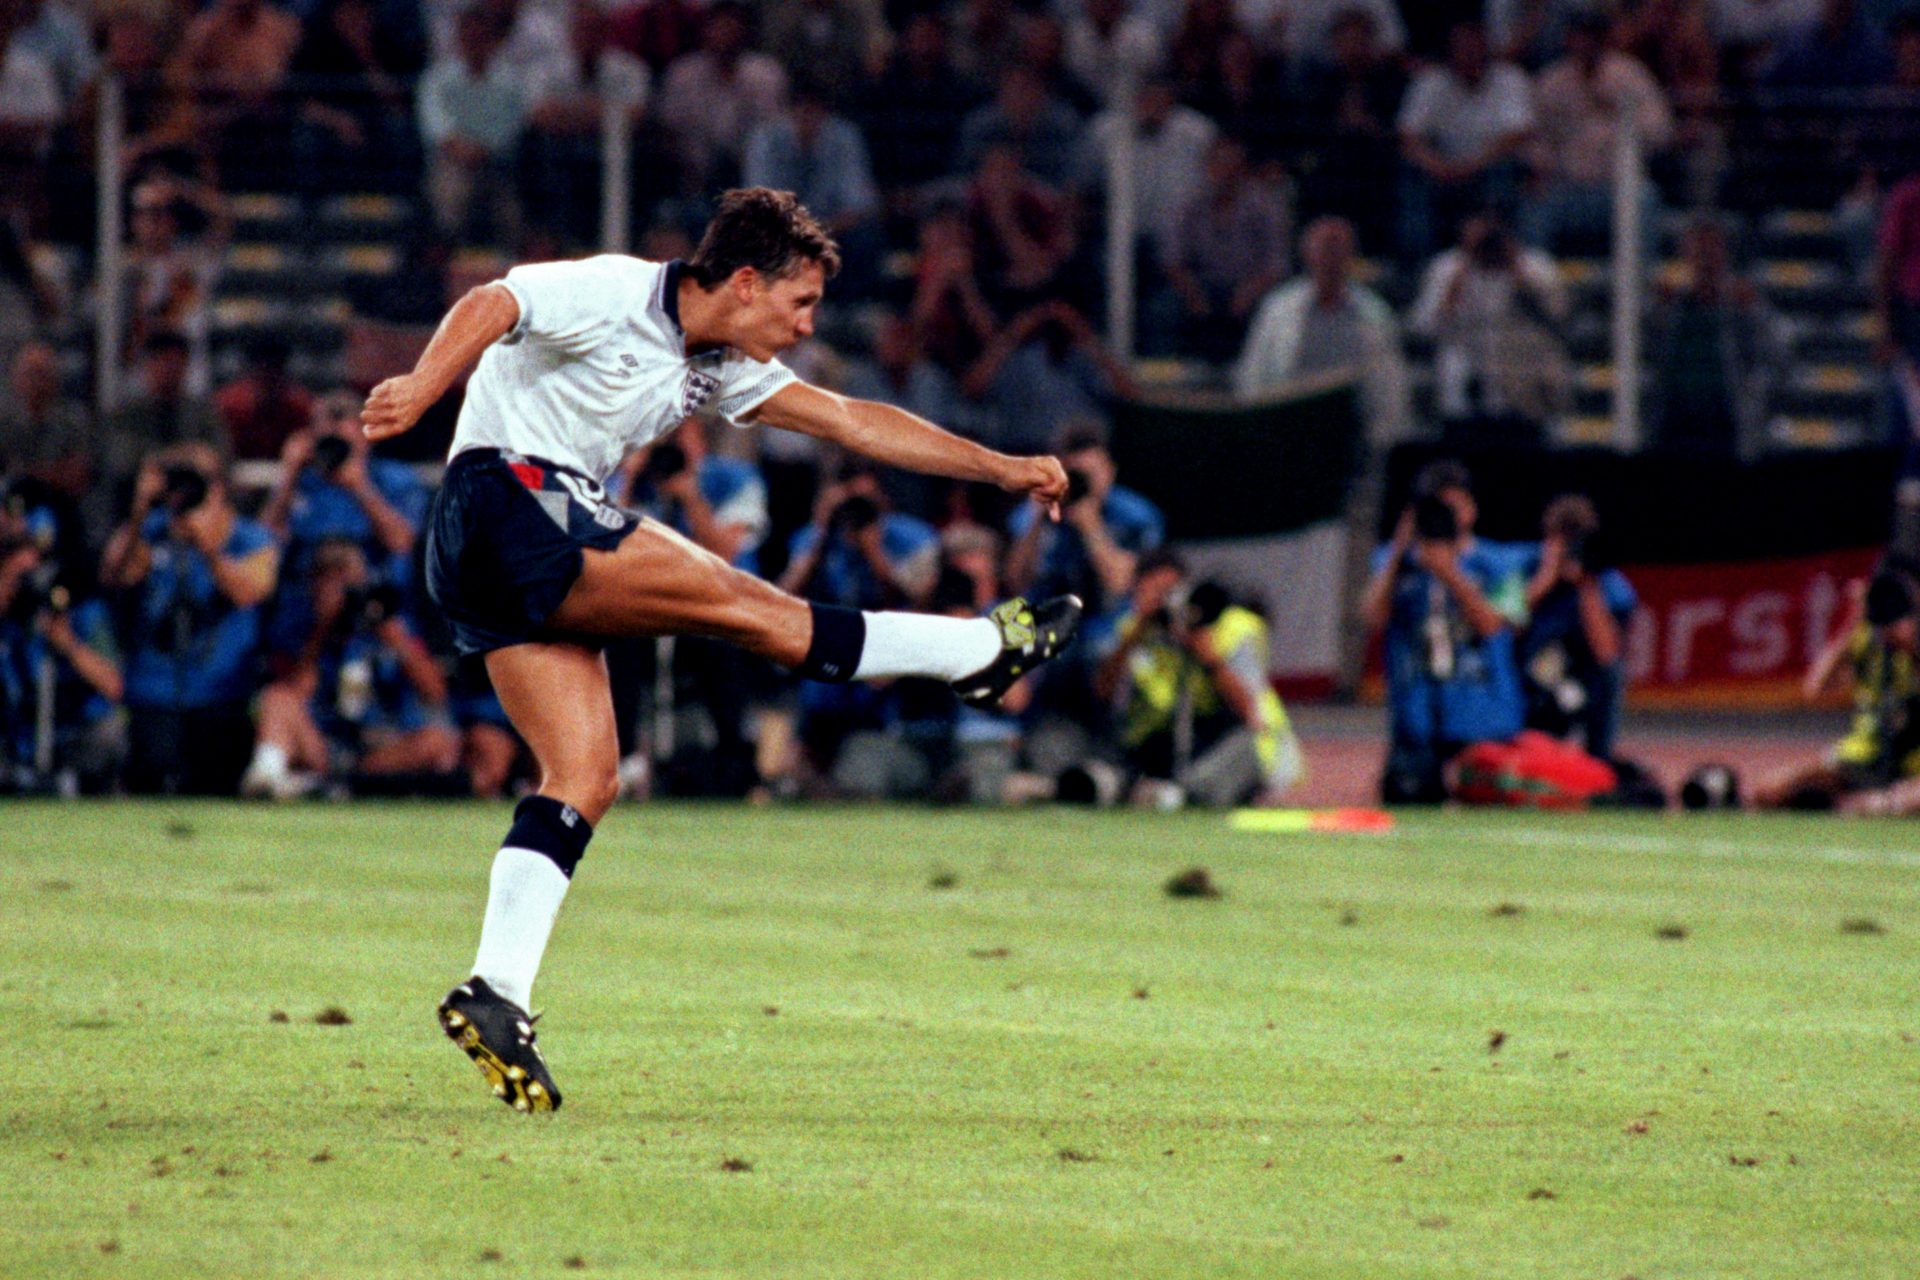 England vs West Germany (1990 World Cup semifinal) 